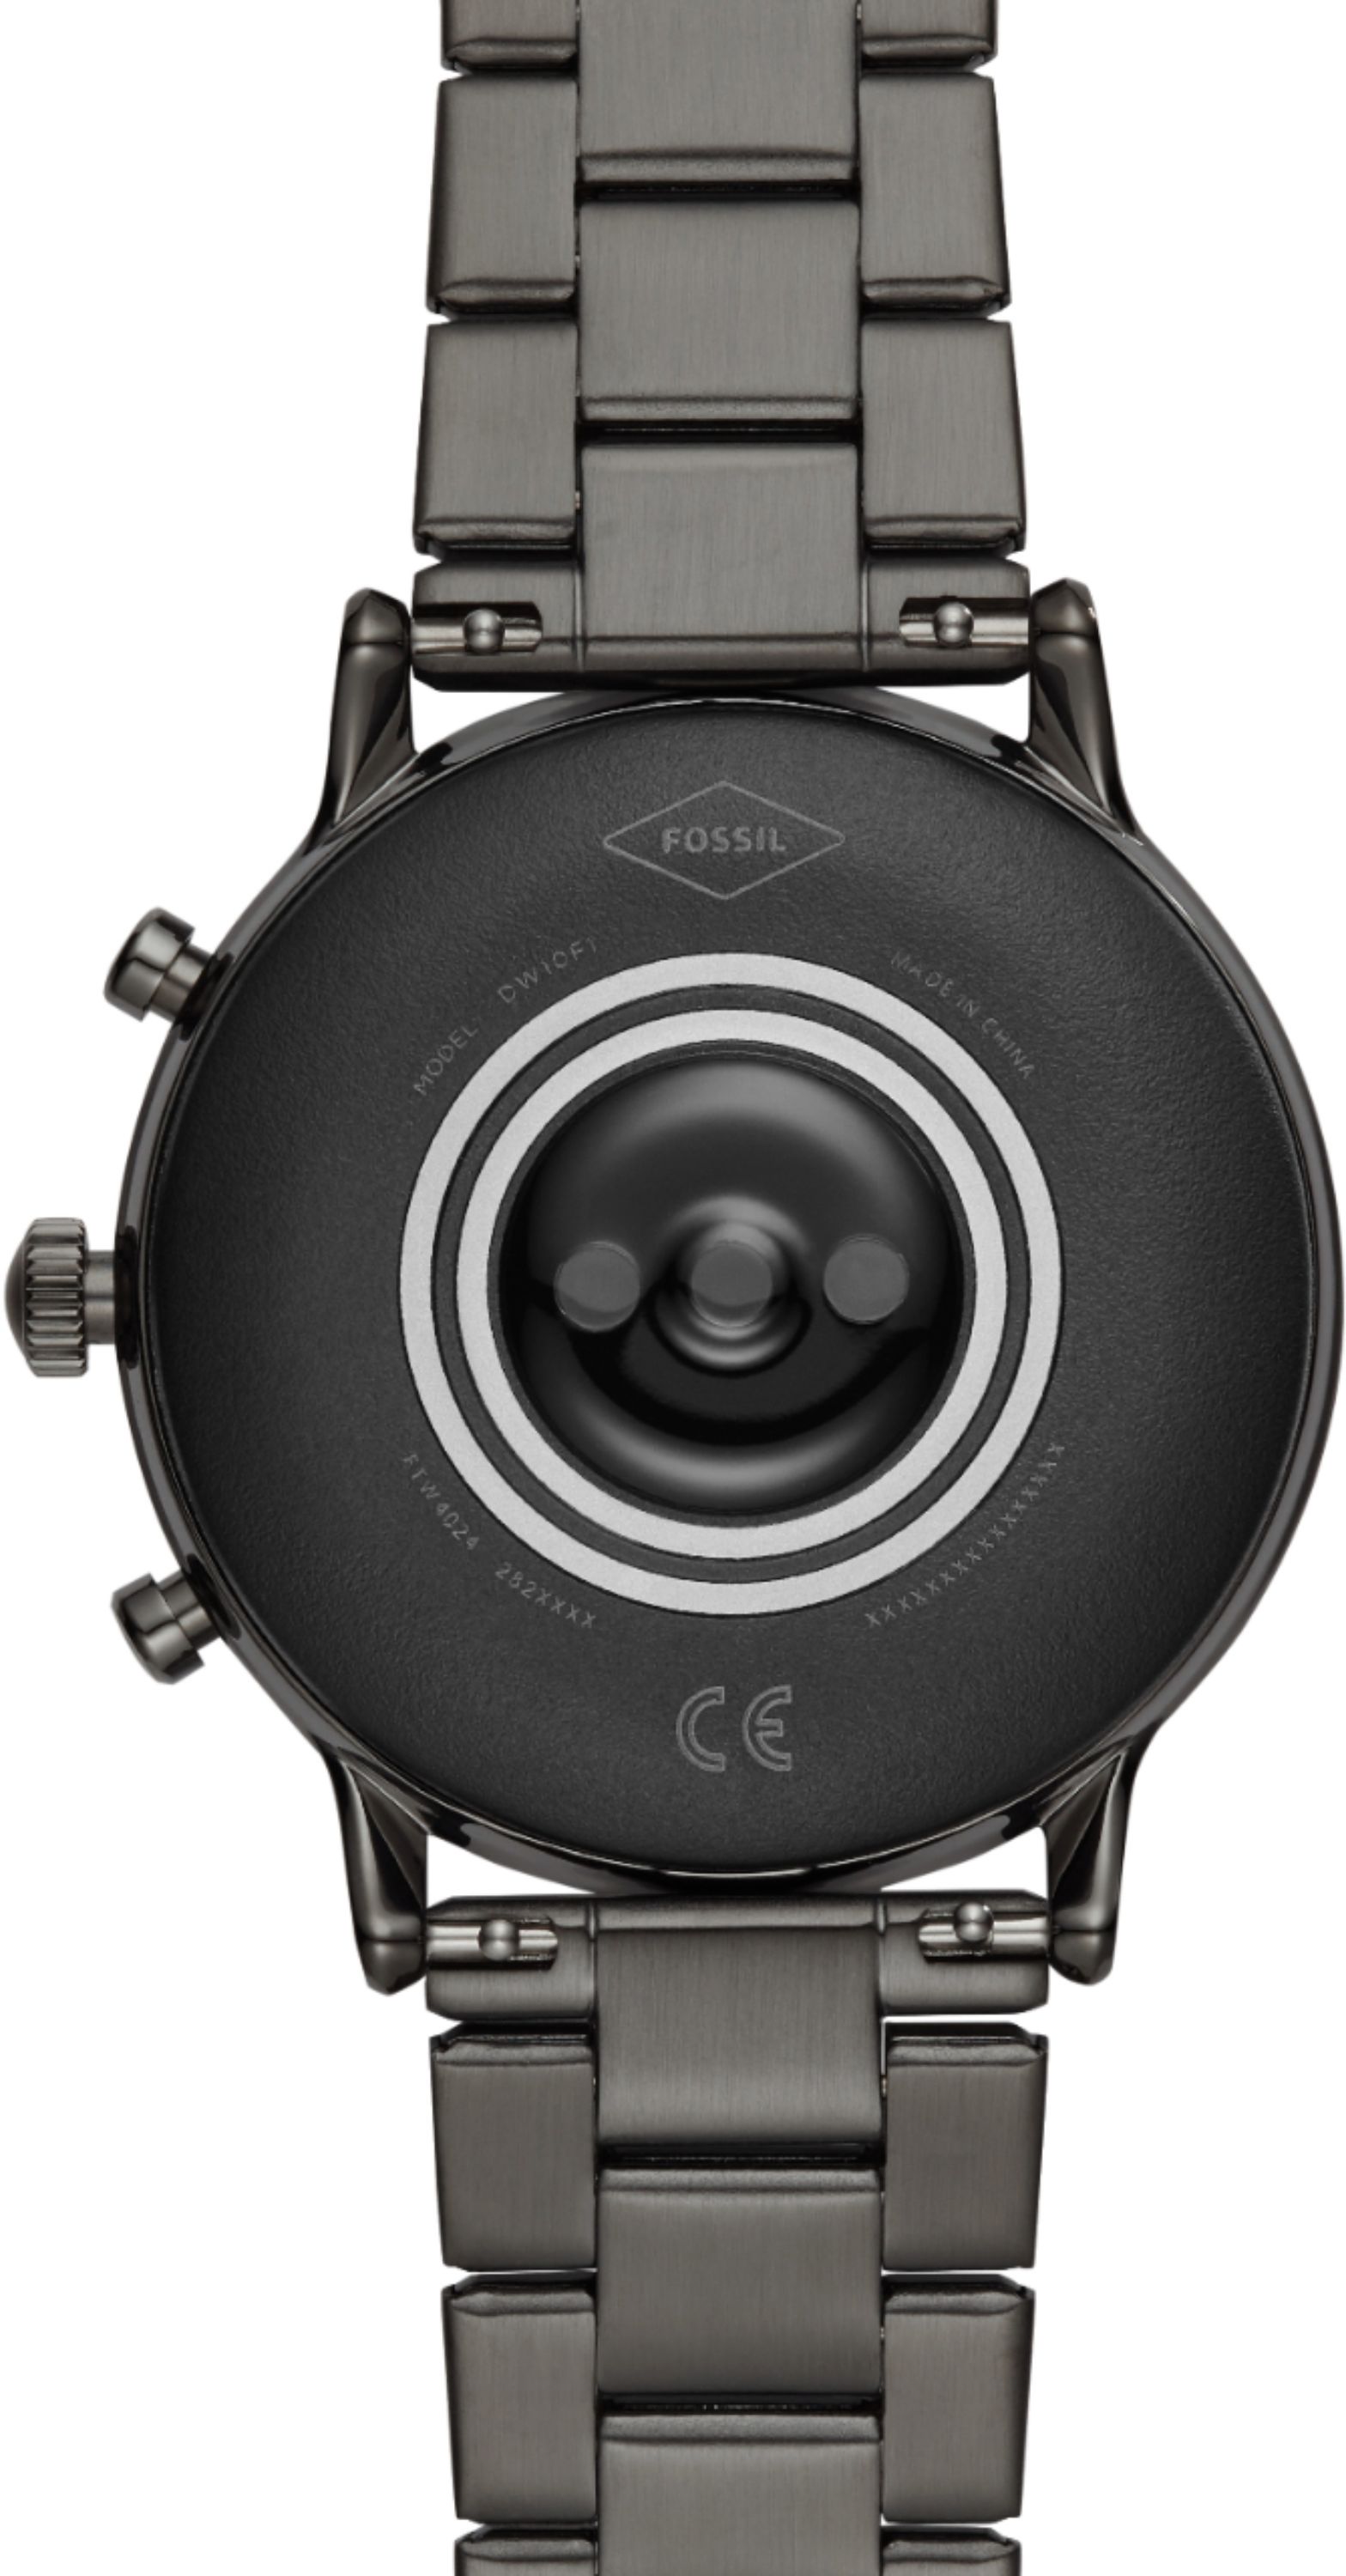 Back View: Fossil - Gen 5 Smartwatch 44mm Stainless Steel - Smoke with Smoke Stainless Steel Band